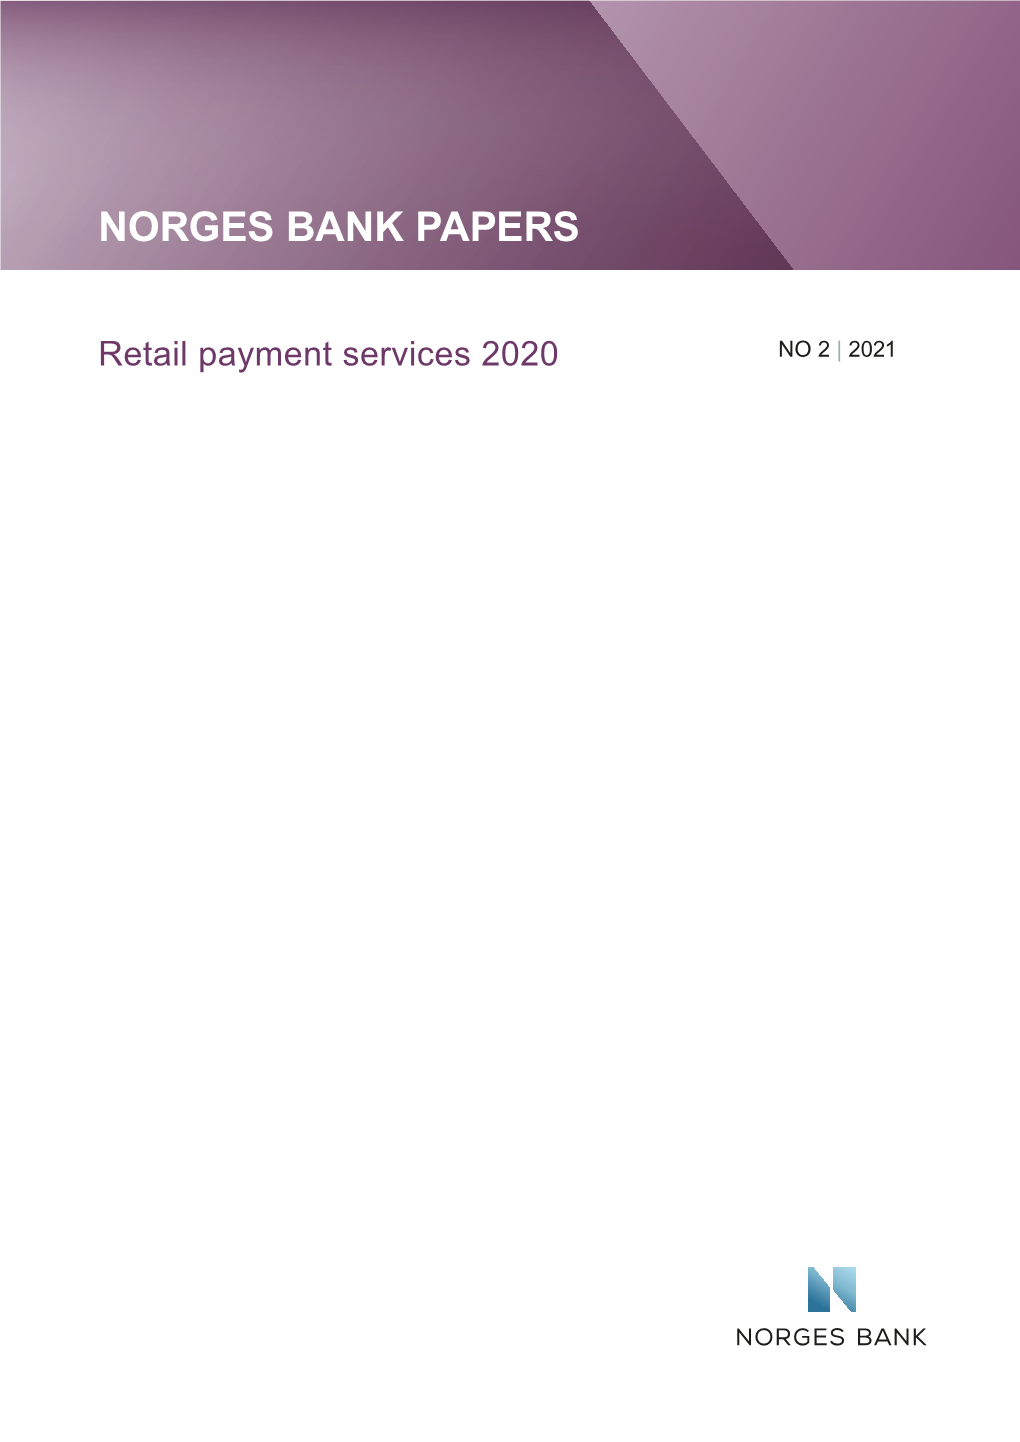 Norges Bank Papers 2/21: Retail Payment Services 2020